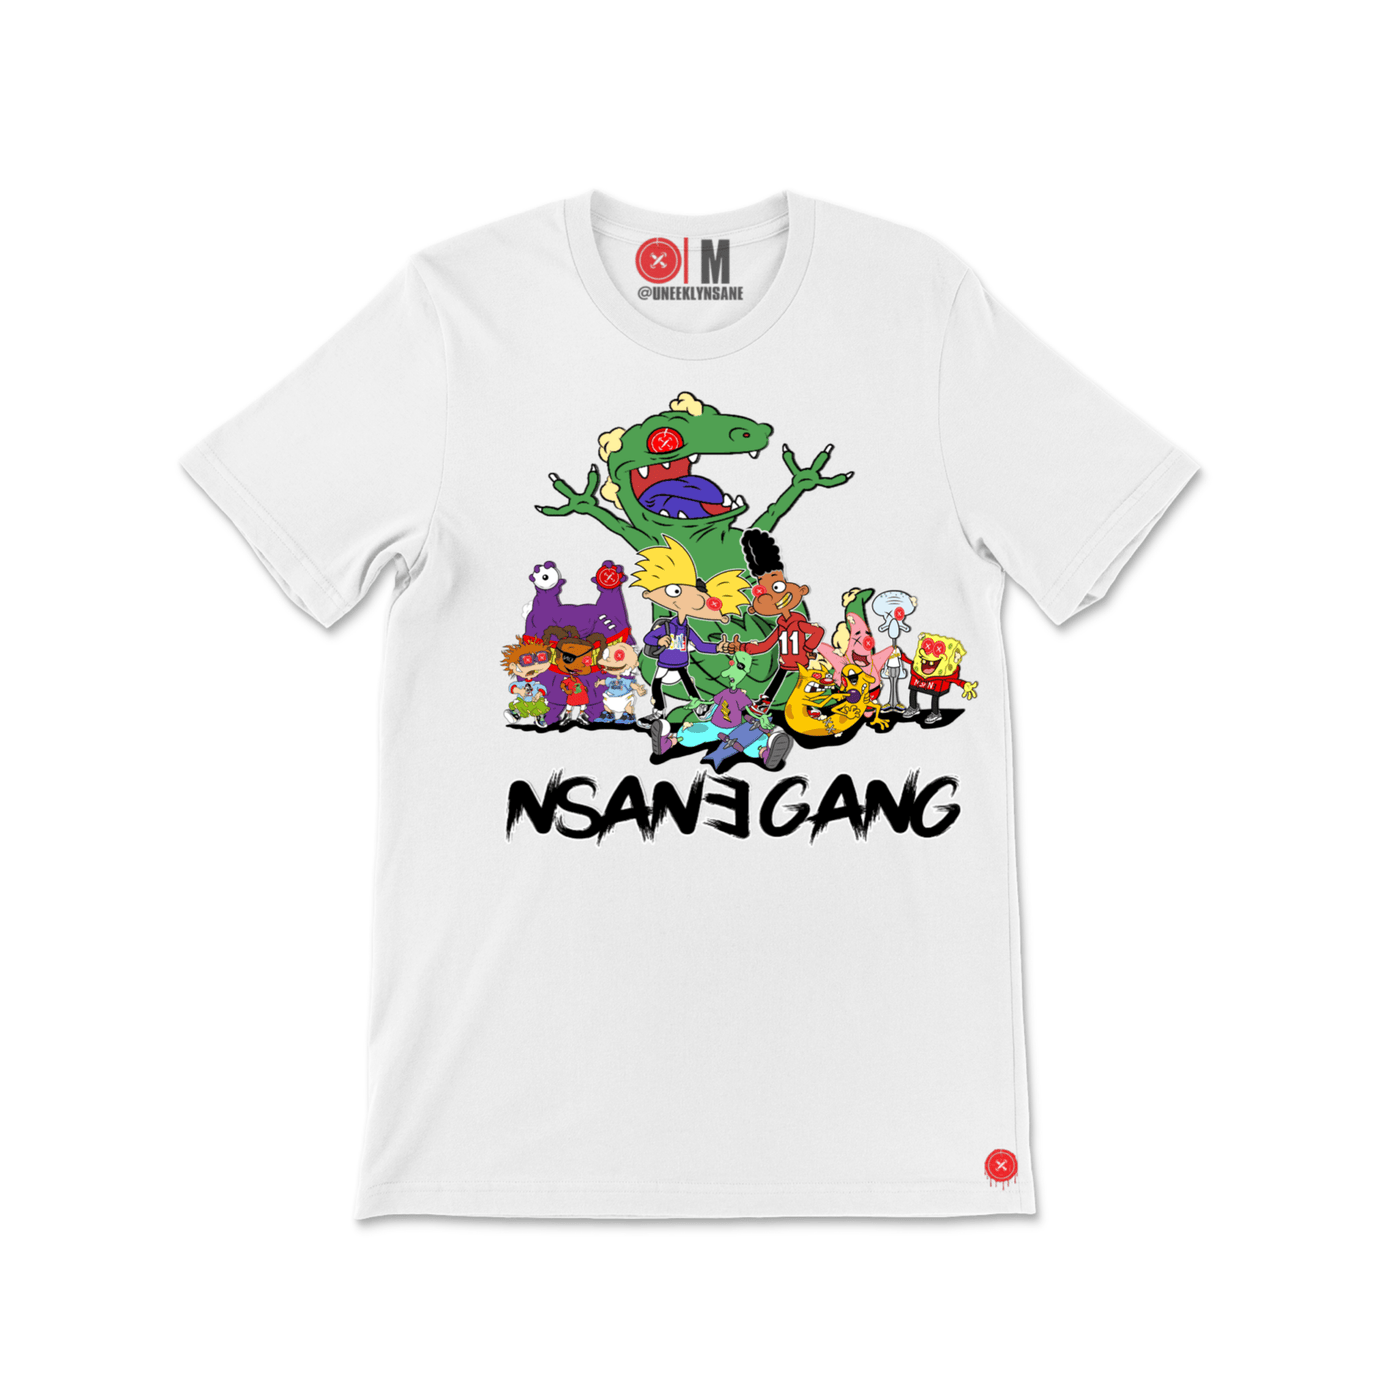 What The Nsane T-Shirt - Unique Sweatsuits, hats, tees, shorts, hoodies, Outwear & accessories online | Uneekly Nsane